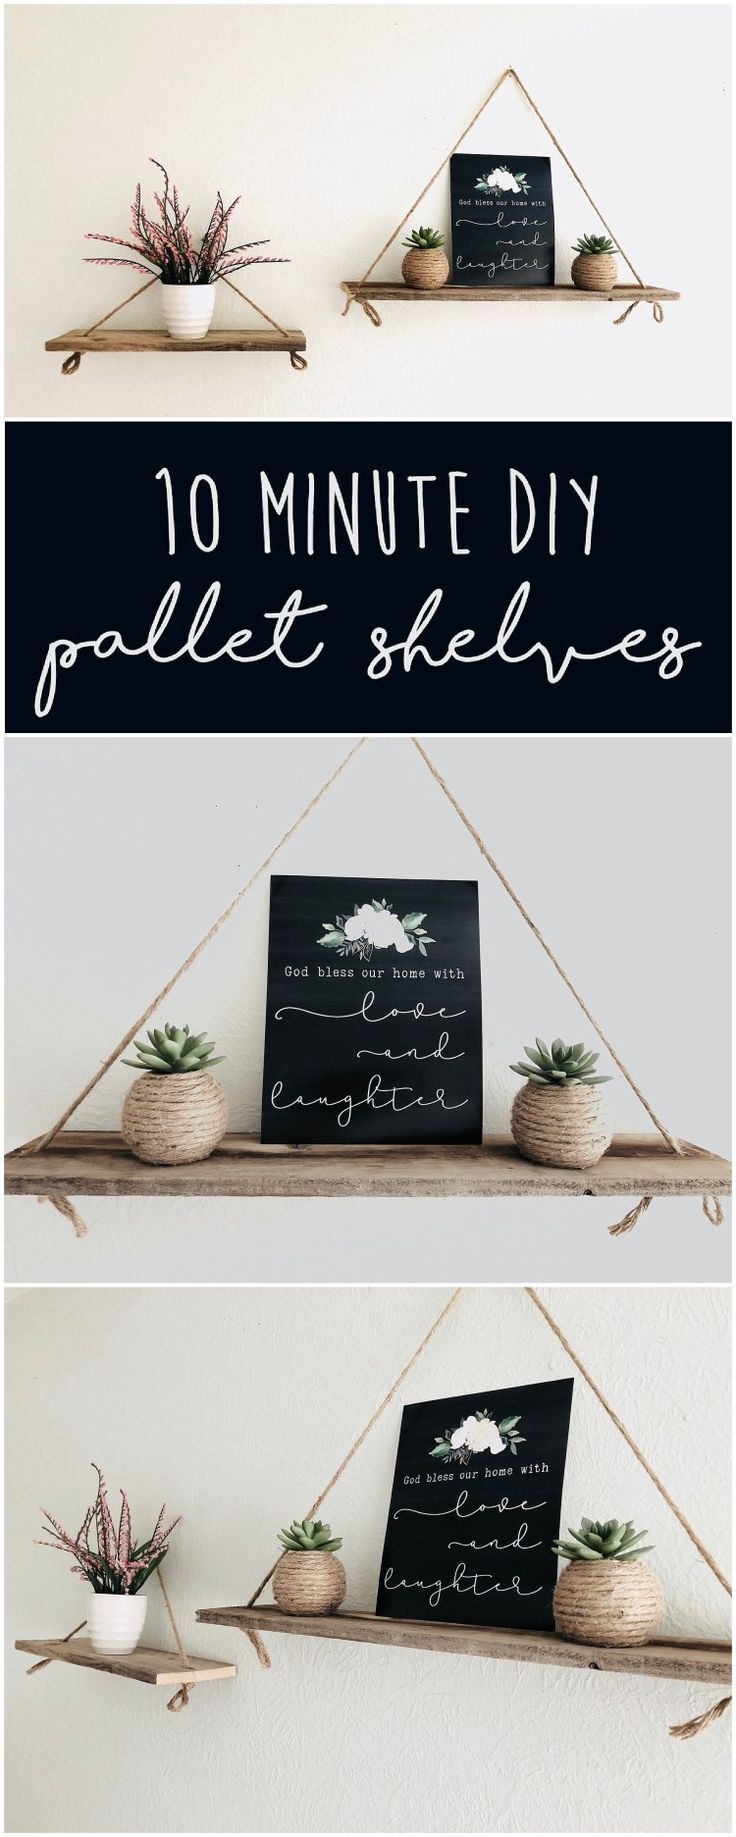 Easy DIY Pallet Shelves - Six Clever Sisters - Easy DIY Pallet Shelves - Six Clever Sisters -   18 pallet diy Easy ideas